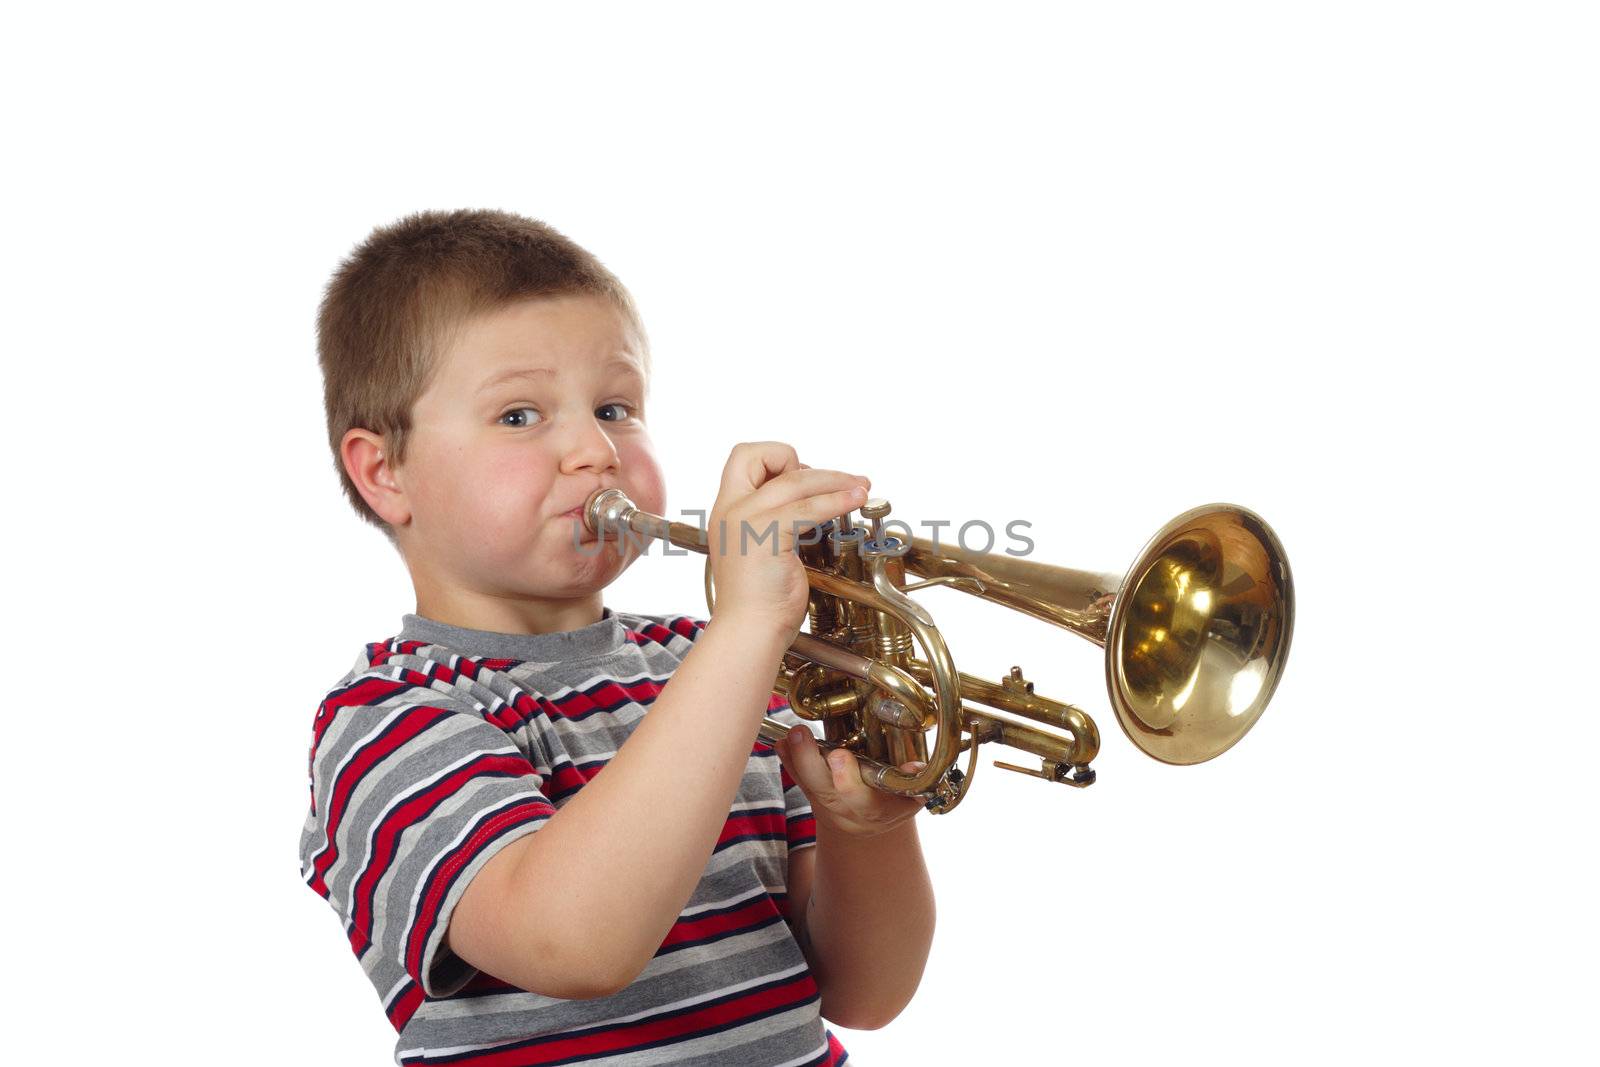 Boy Blowing Trumpet photo on the white background